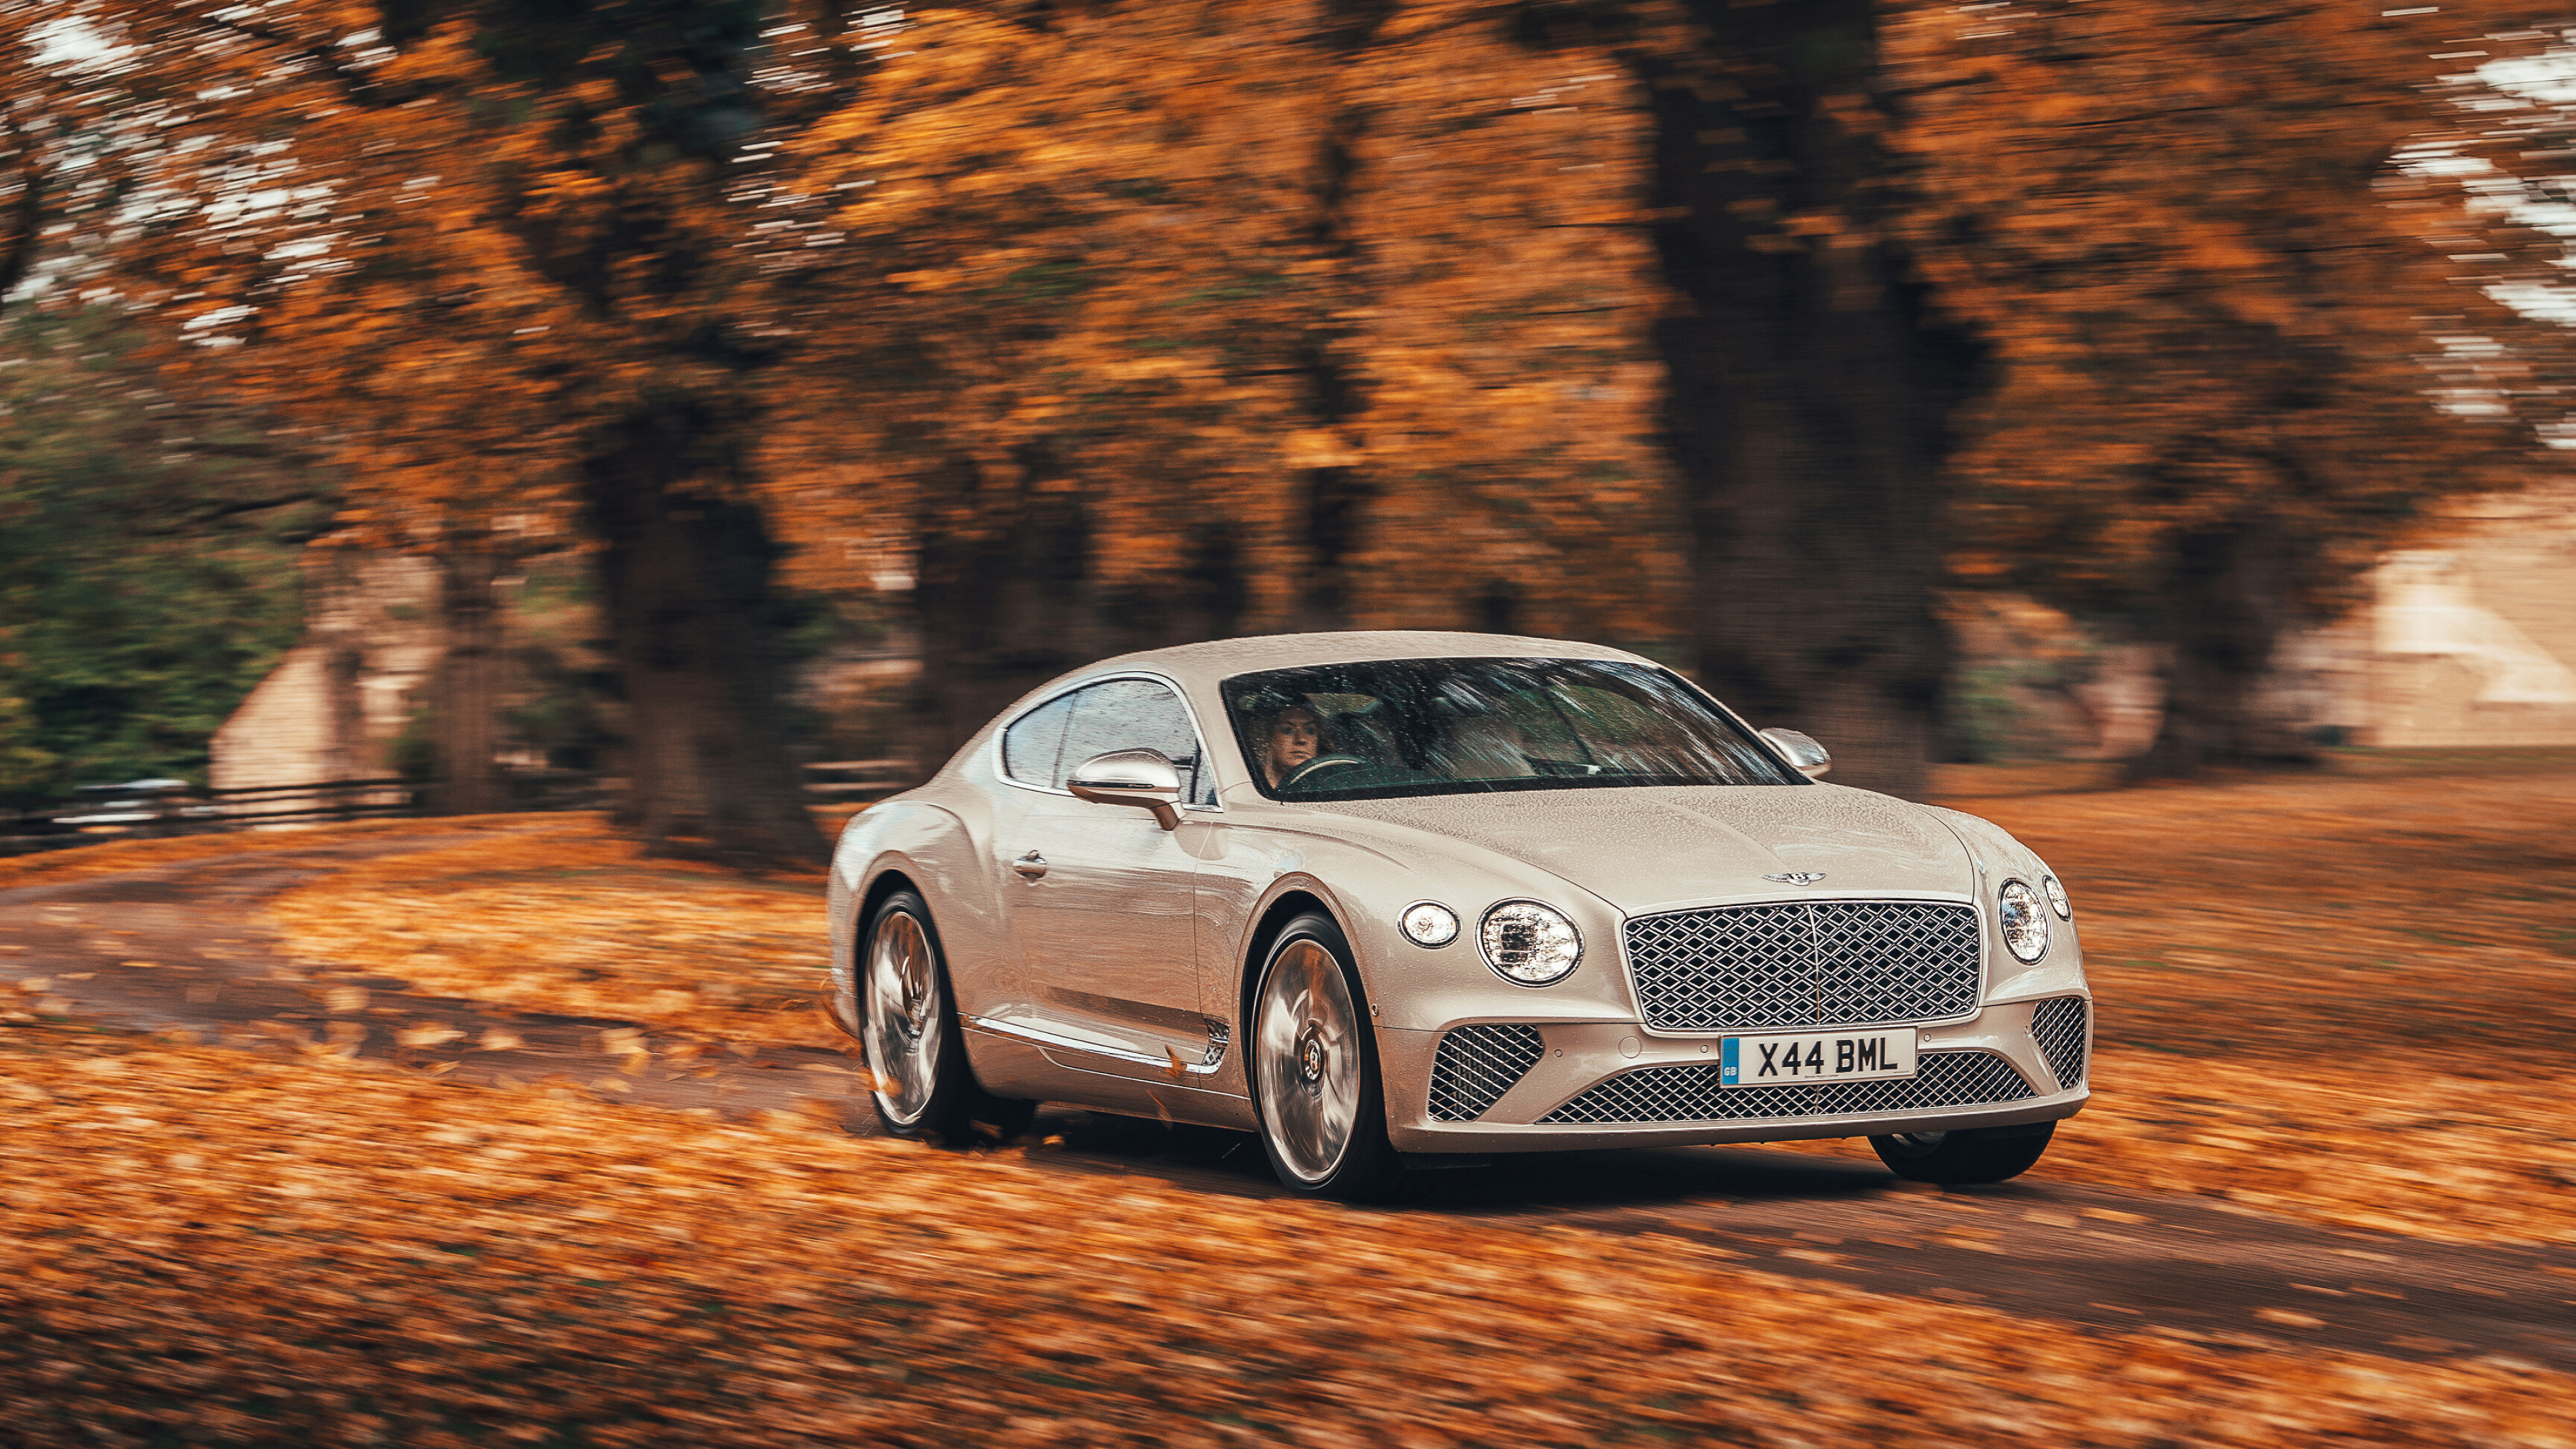 Bentley: Continental GT Mulliner, The Ultimate Convertible Grand Tourer. 3840x2160 4K Background.